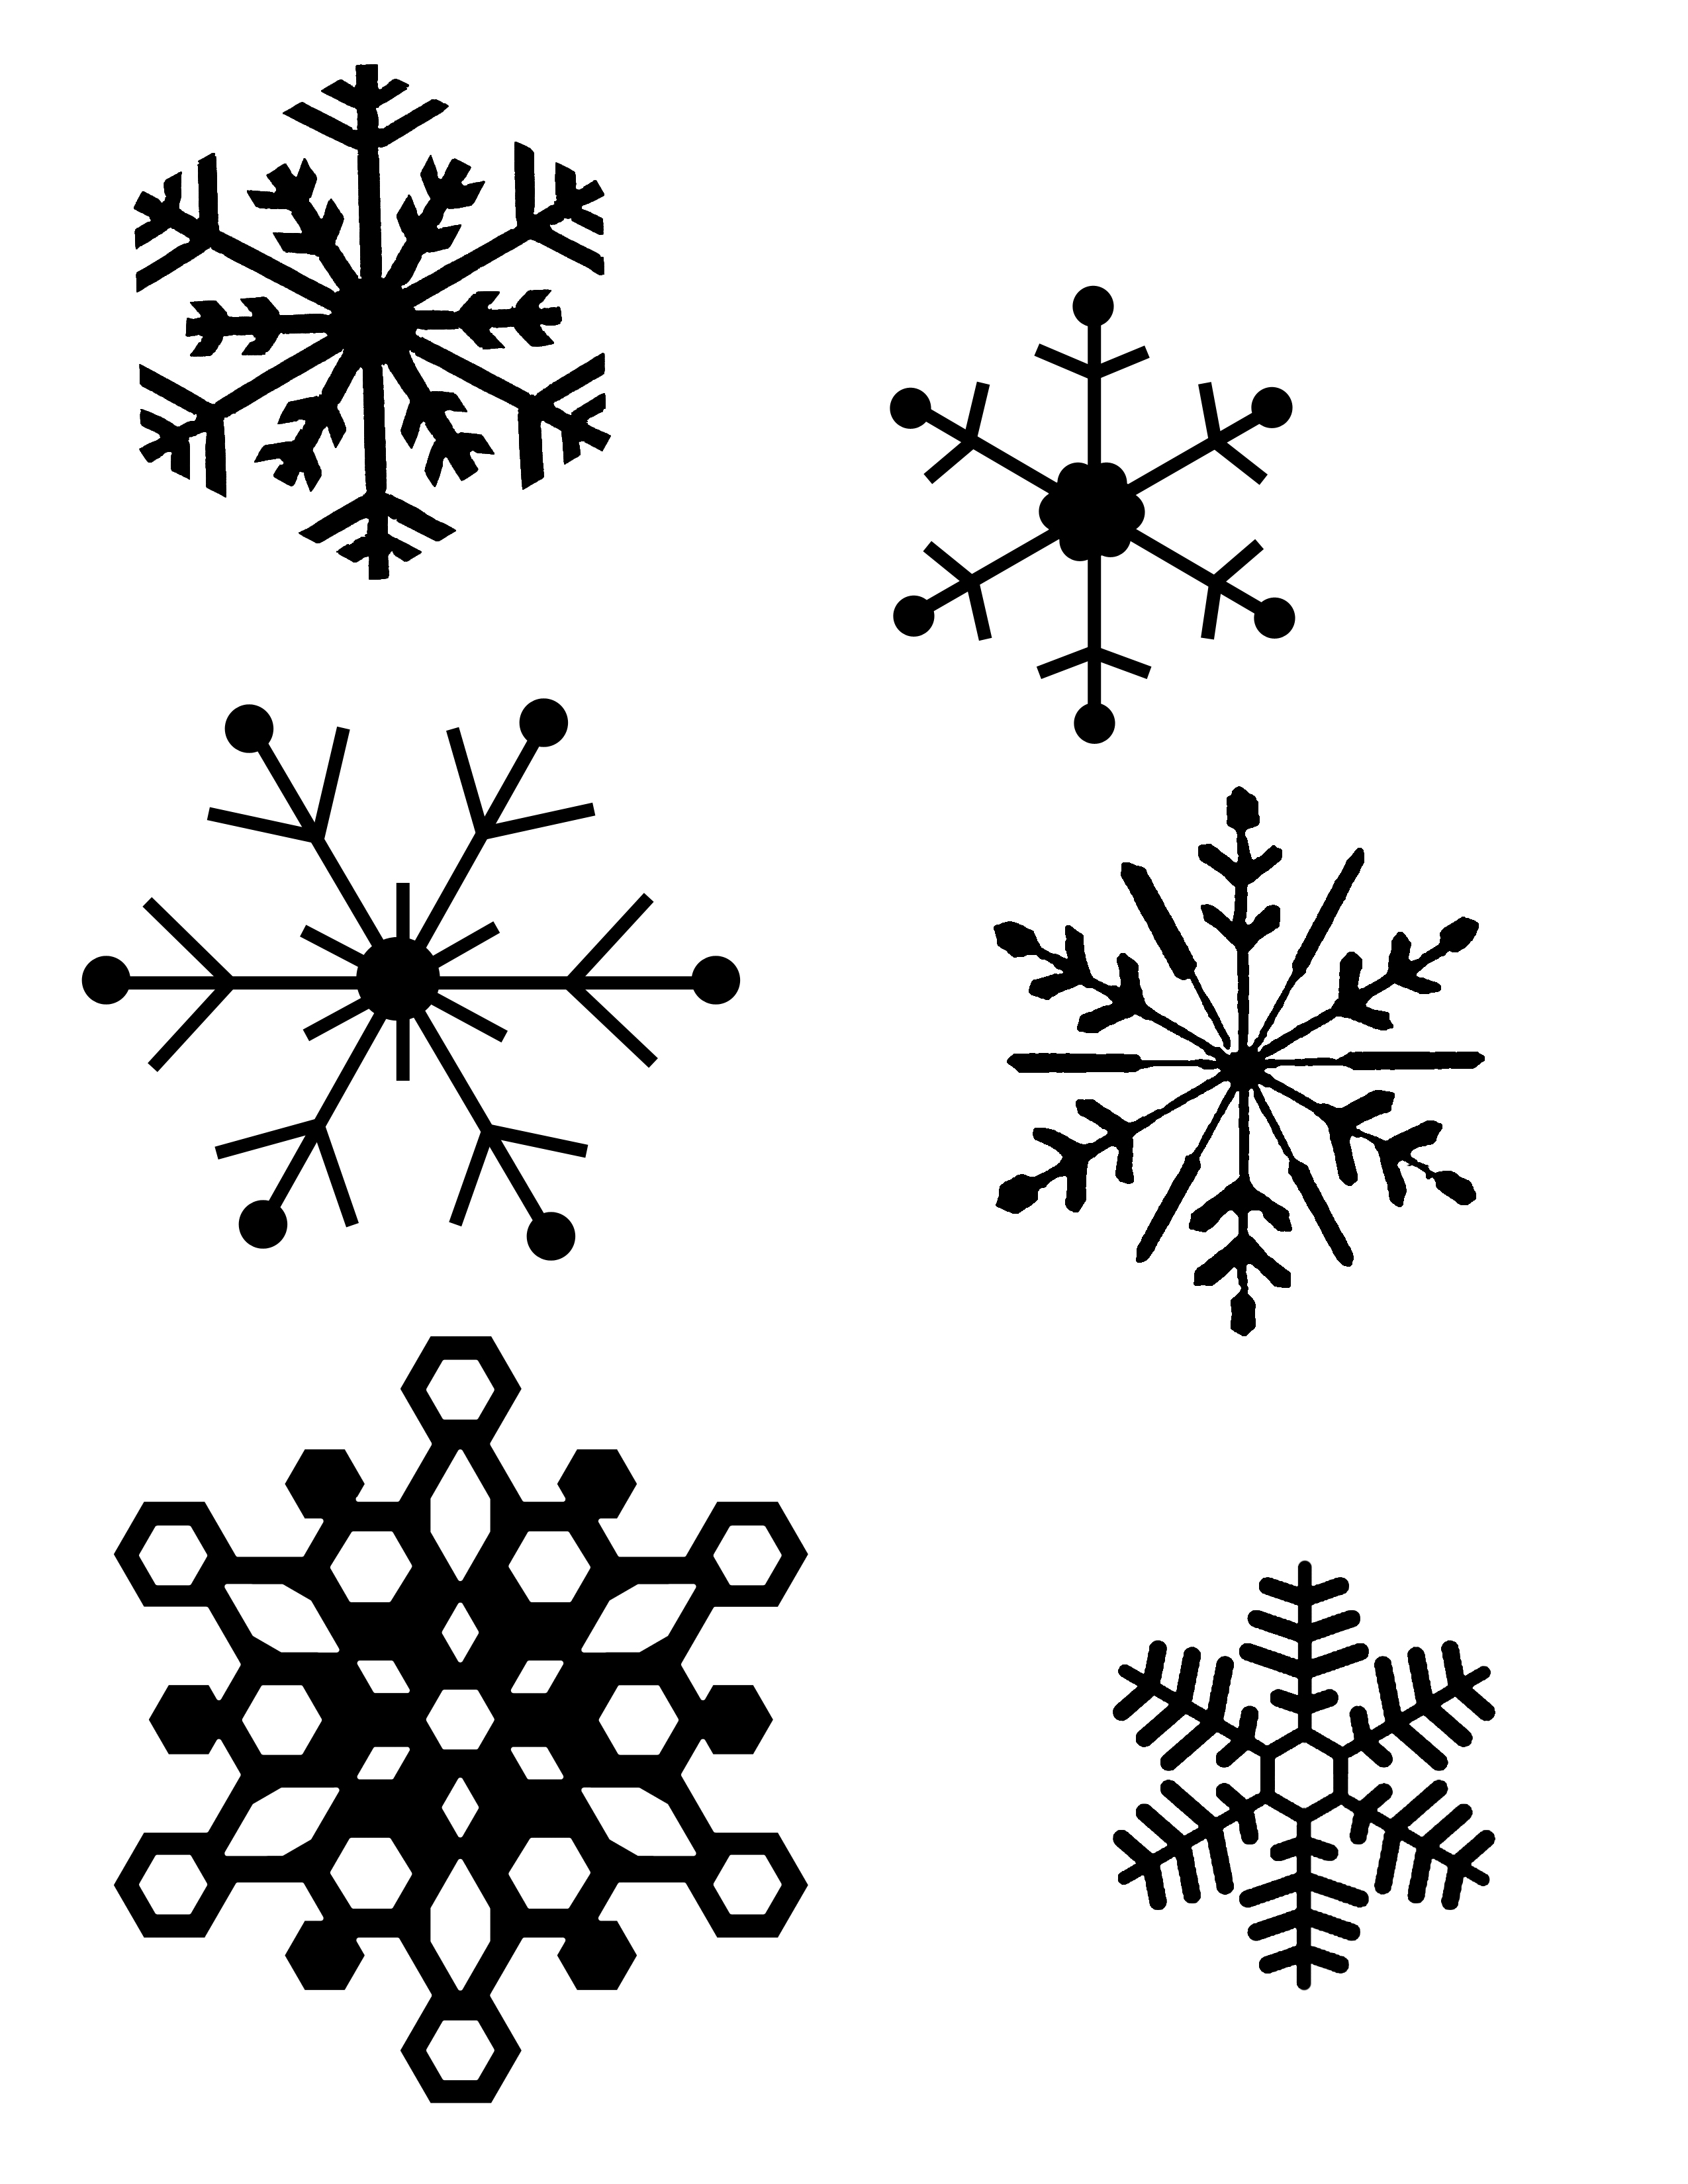 Top How To Draw A Snowflake Easy in the world Learn more here 